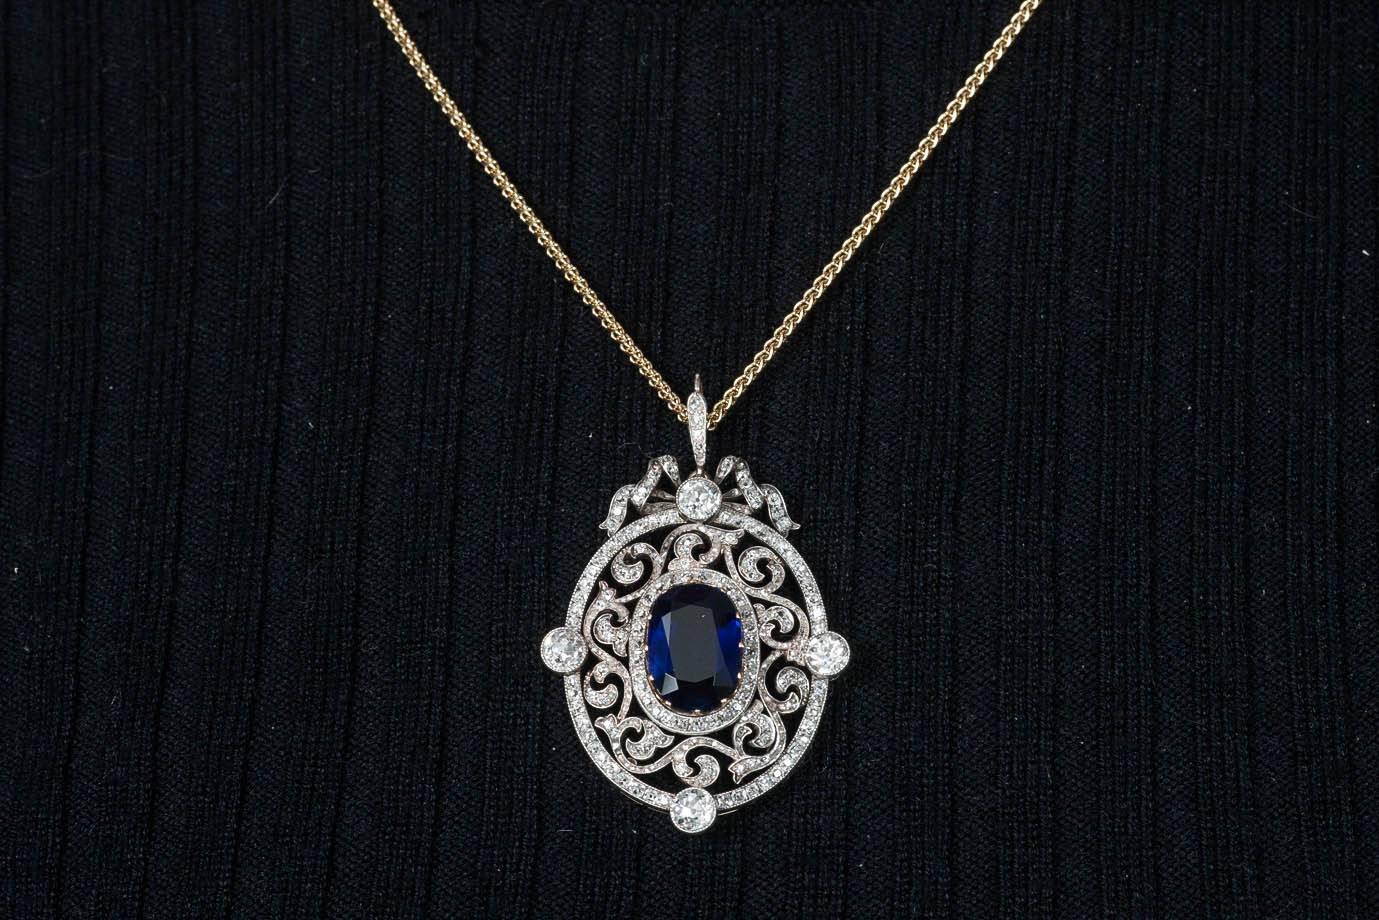 Faberge Moscow 1899  Sapp and Diamond Pendant - Serious offers invited 1